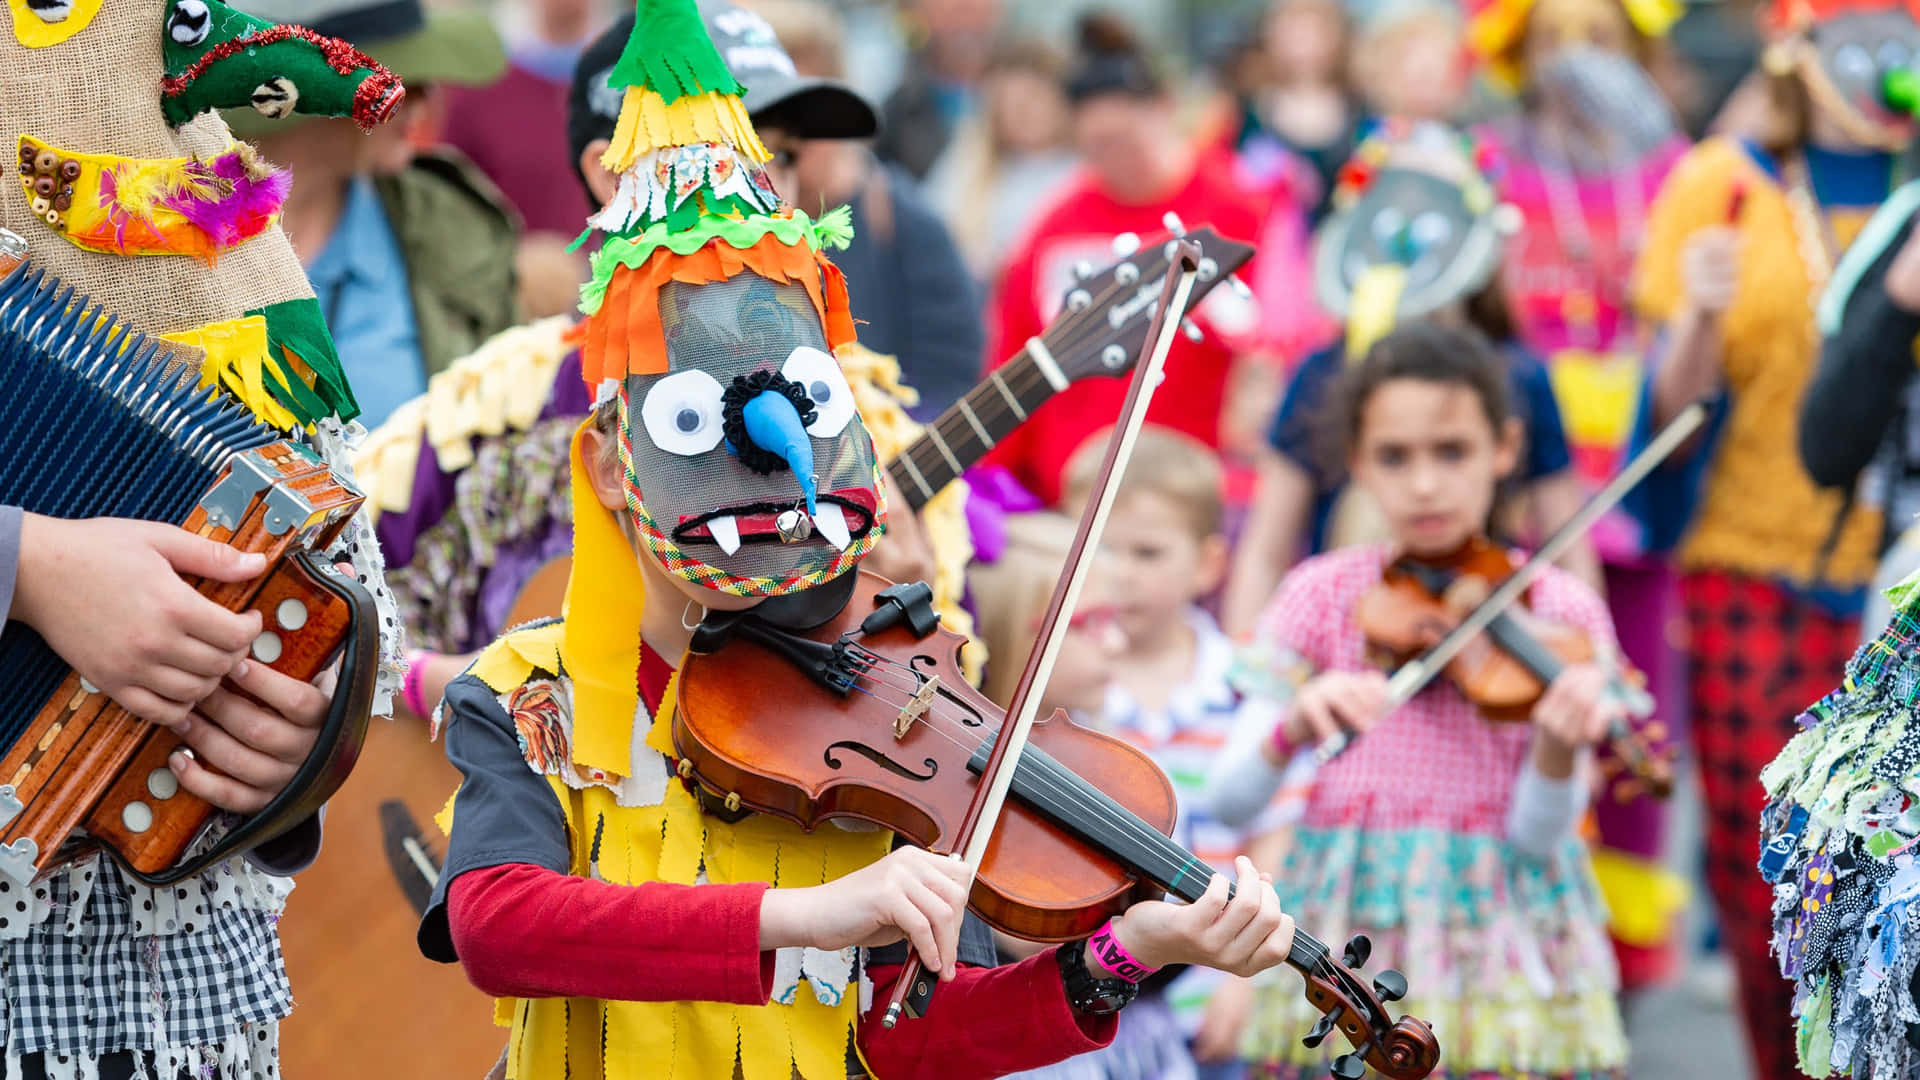 A Group Of People Dressed Up In Costumes Playing Instruments